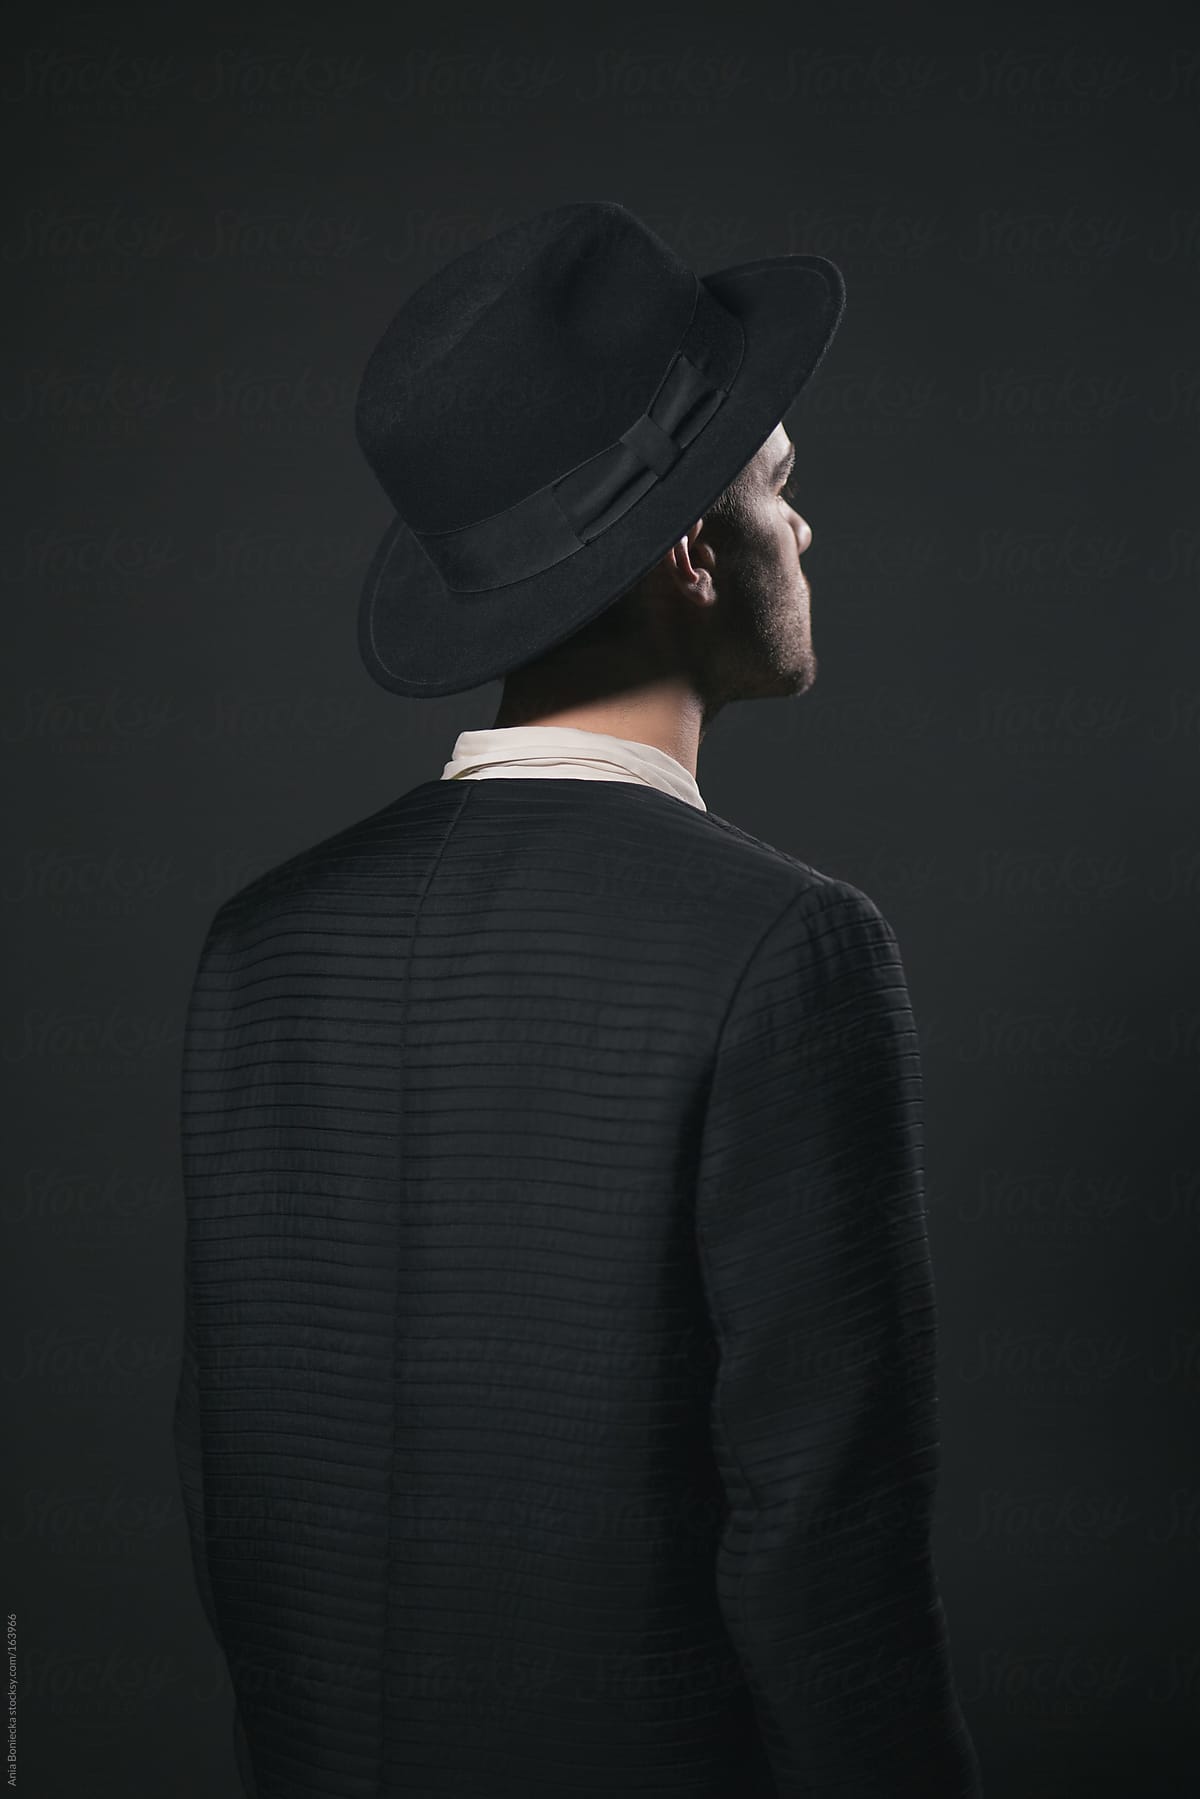 Dark portrait of the back of the man, wearing a hat against a black backgorund